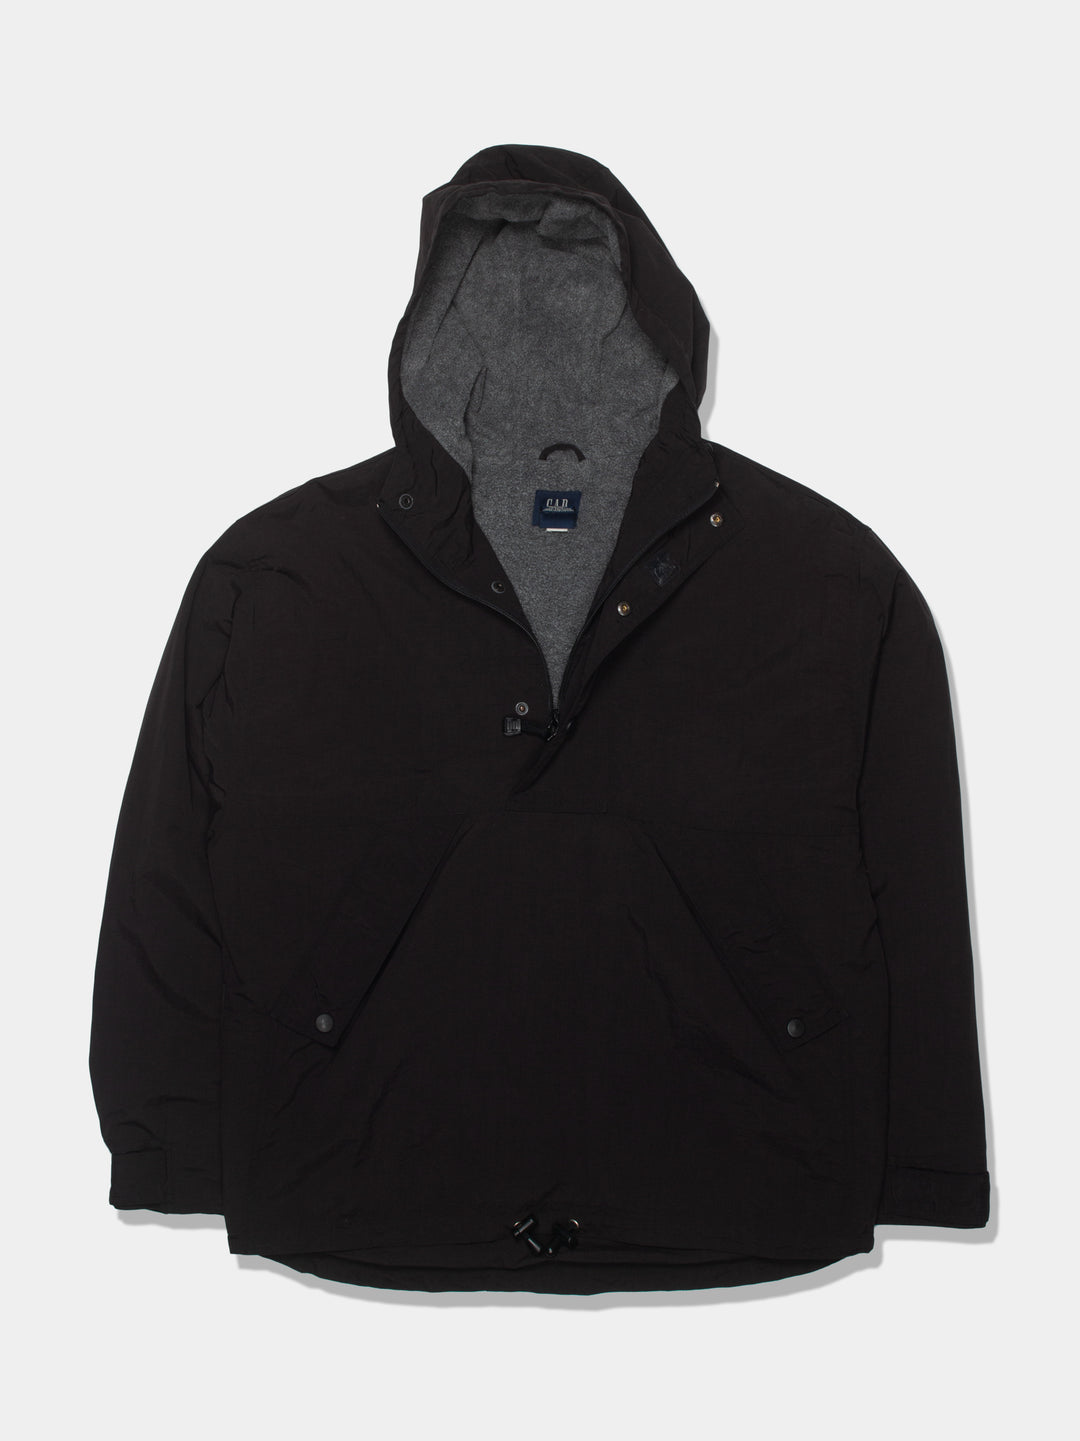 00s Gap Black Out Pull Over Jacket (M)